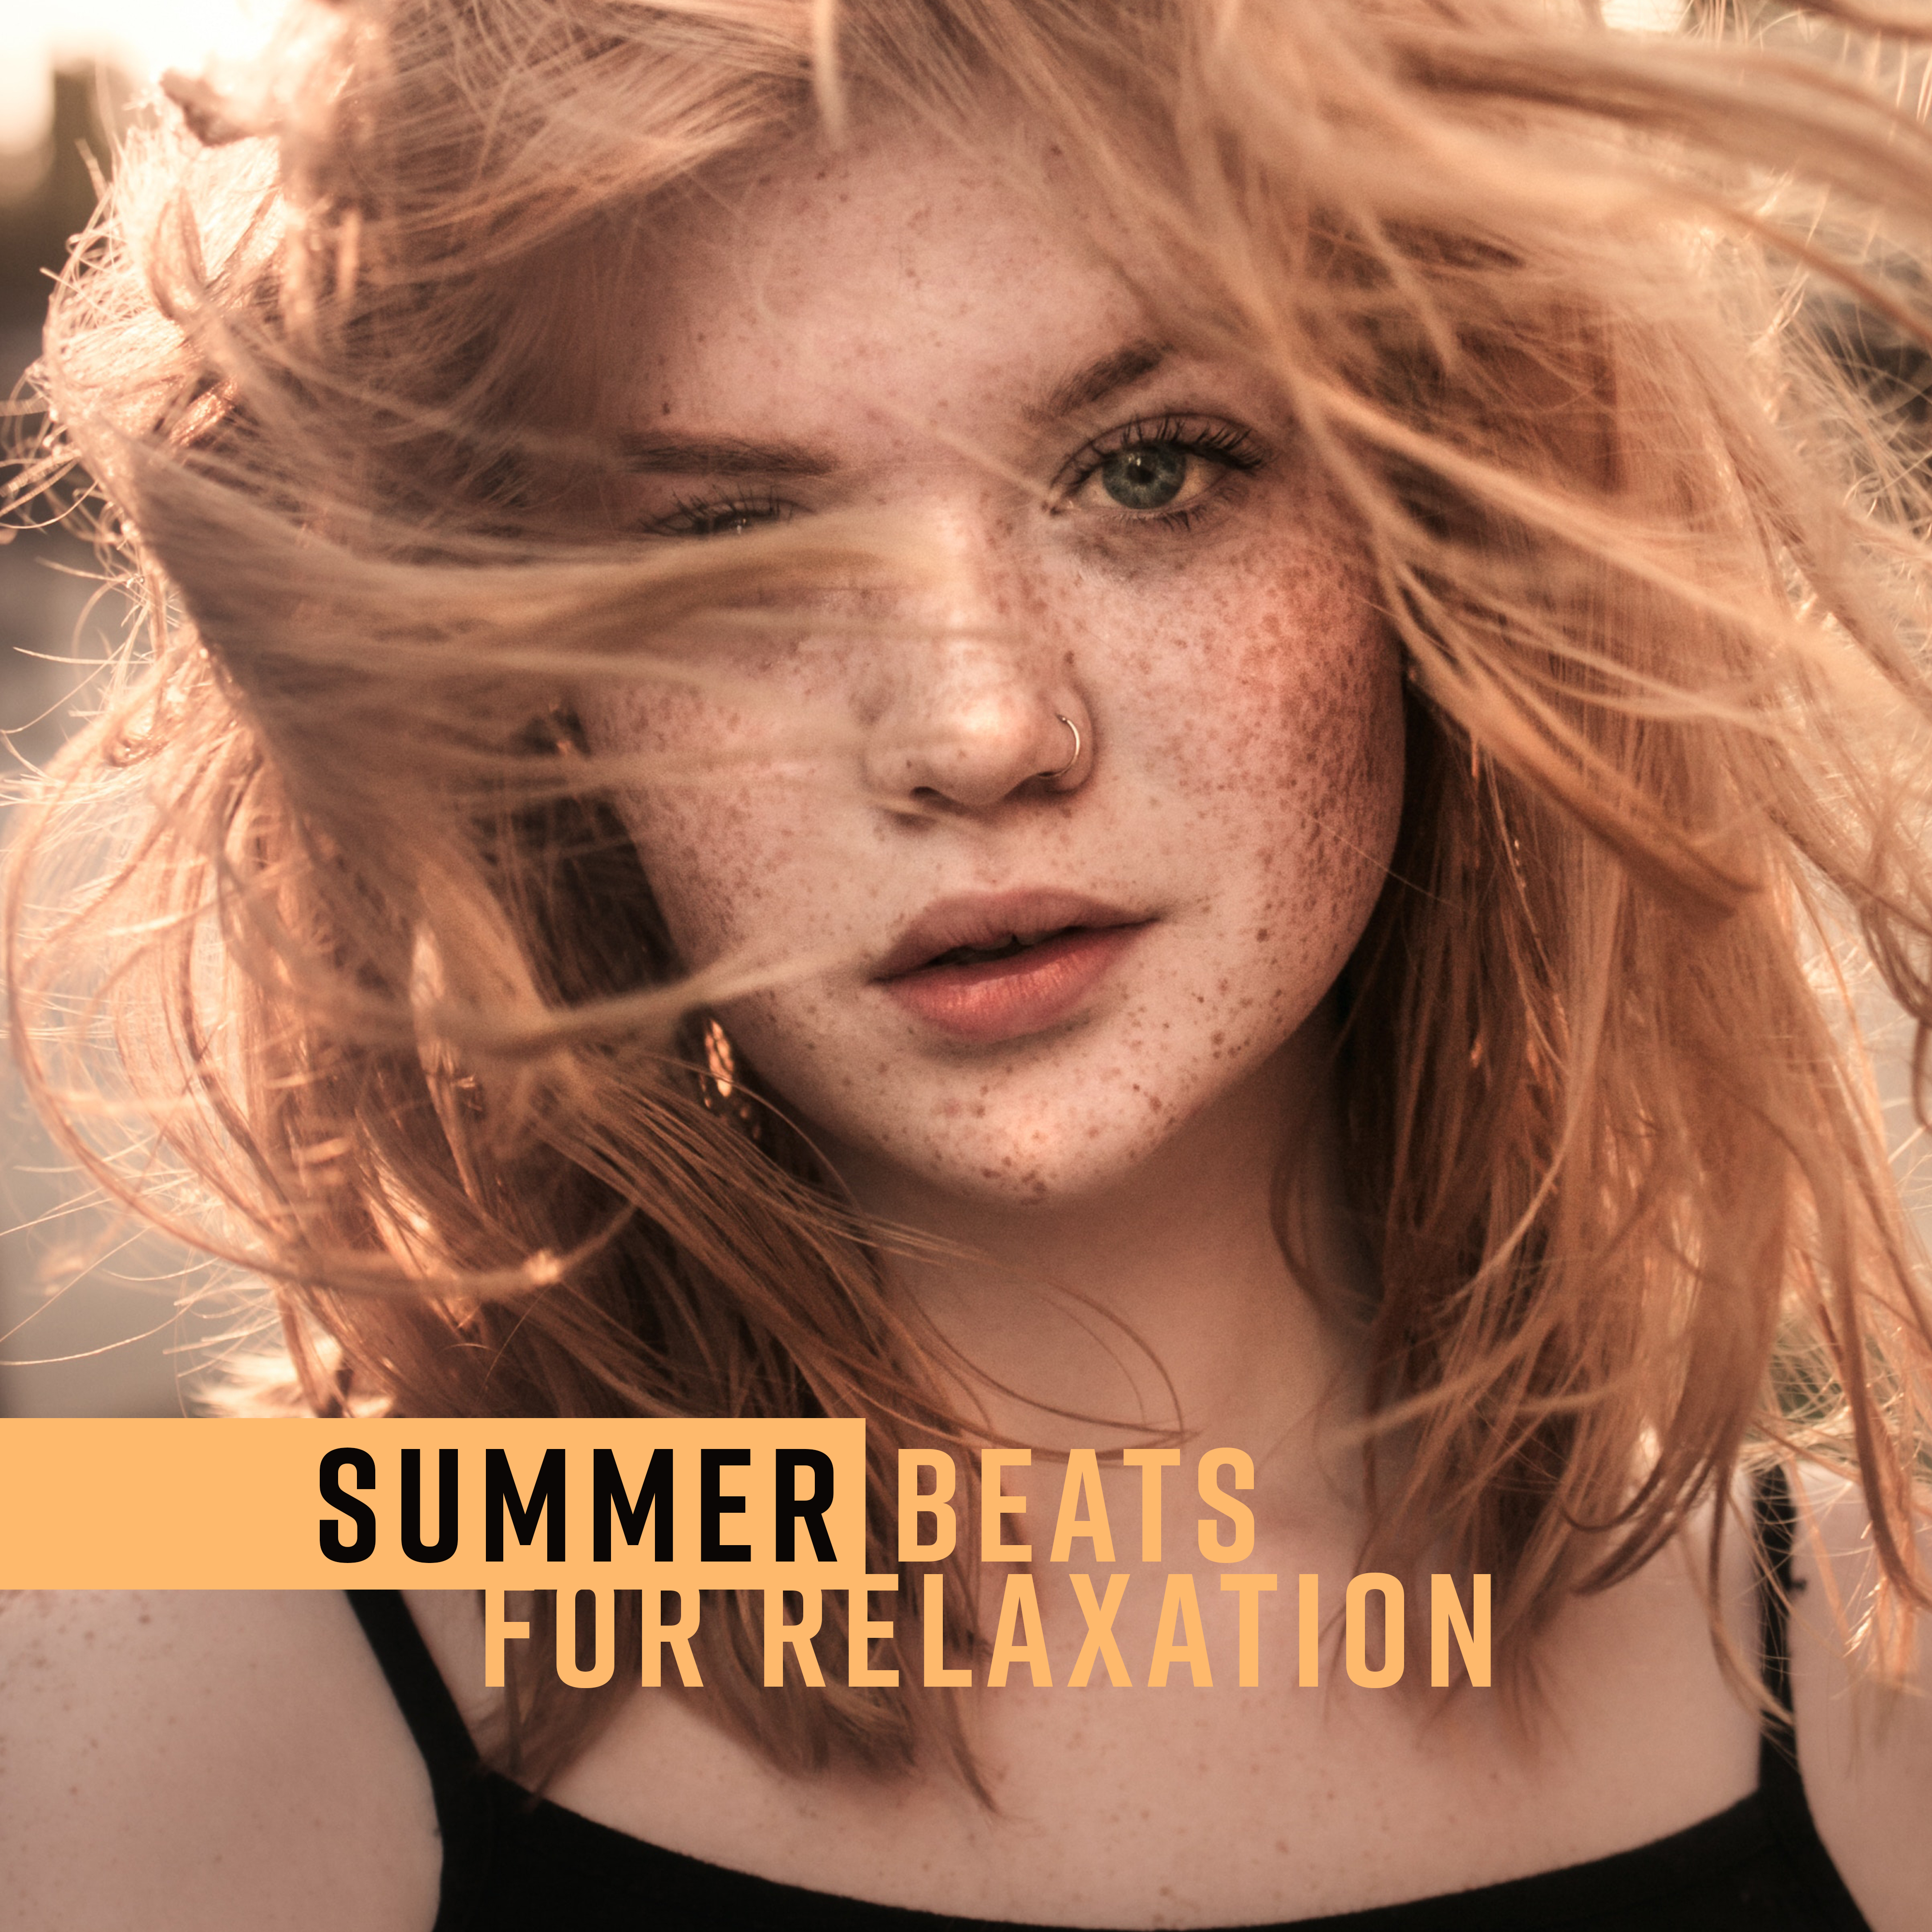 Summer Beats for Relaxation